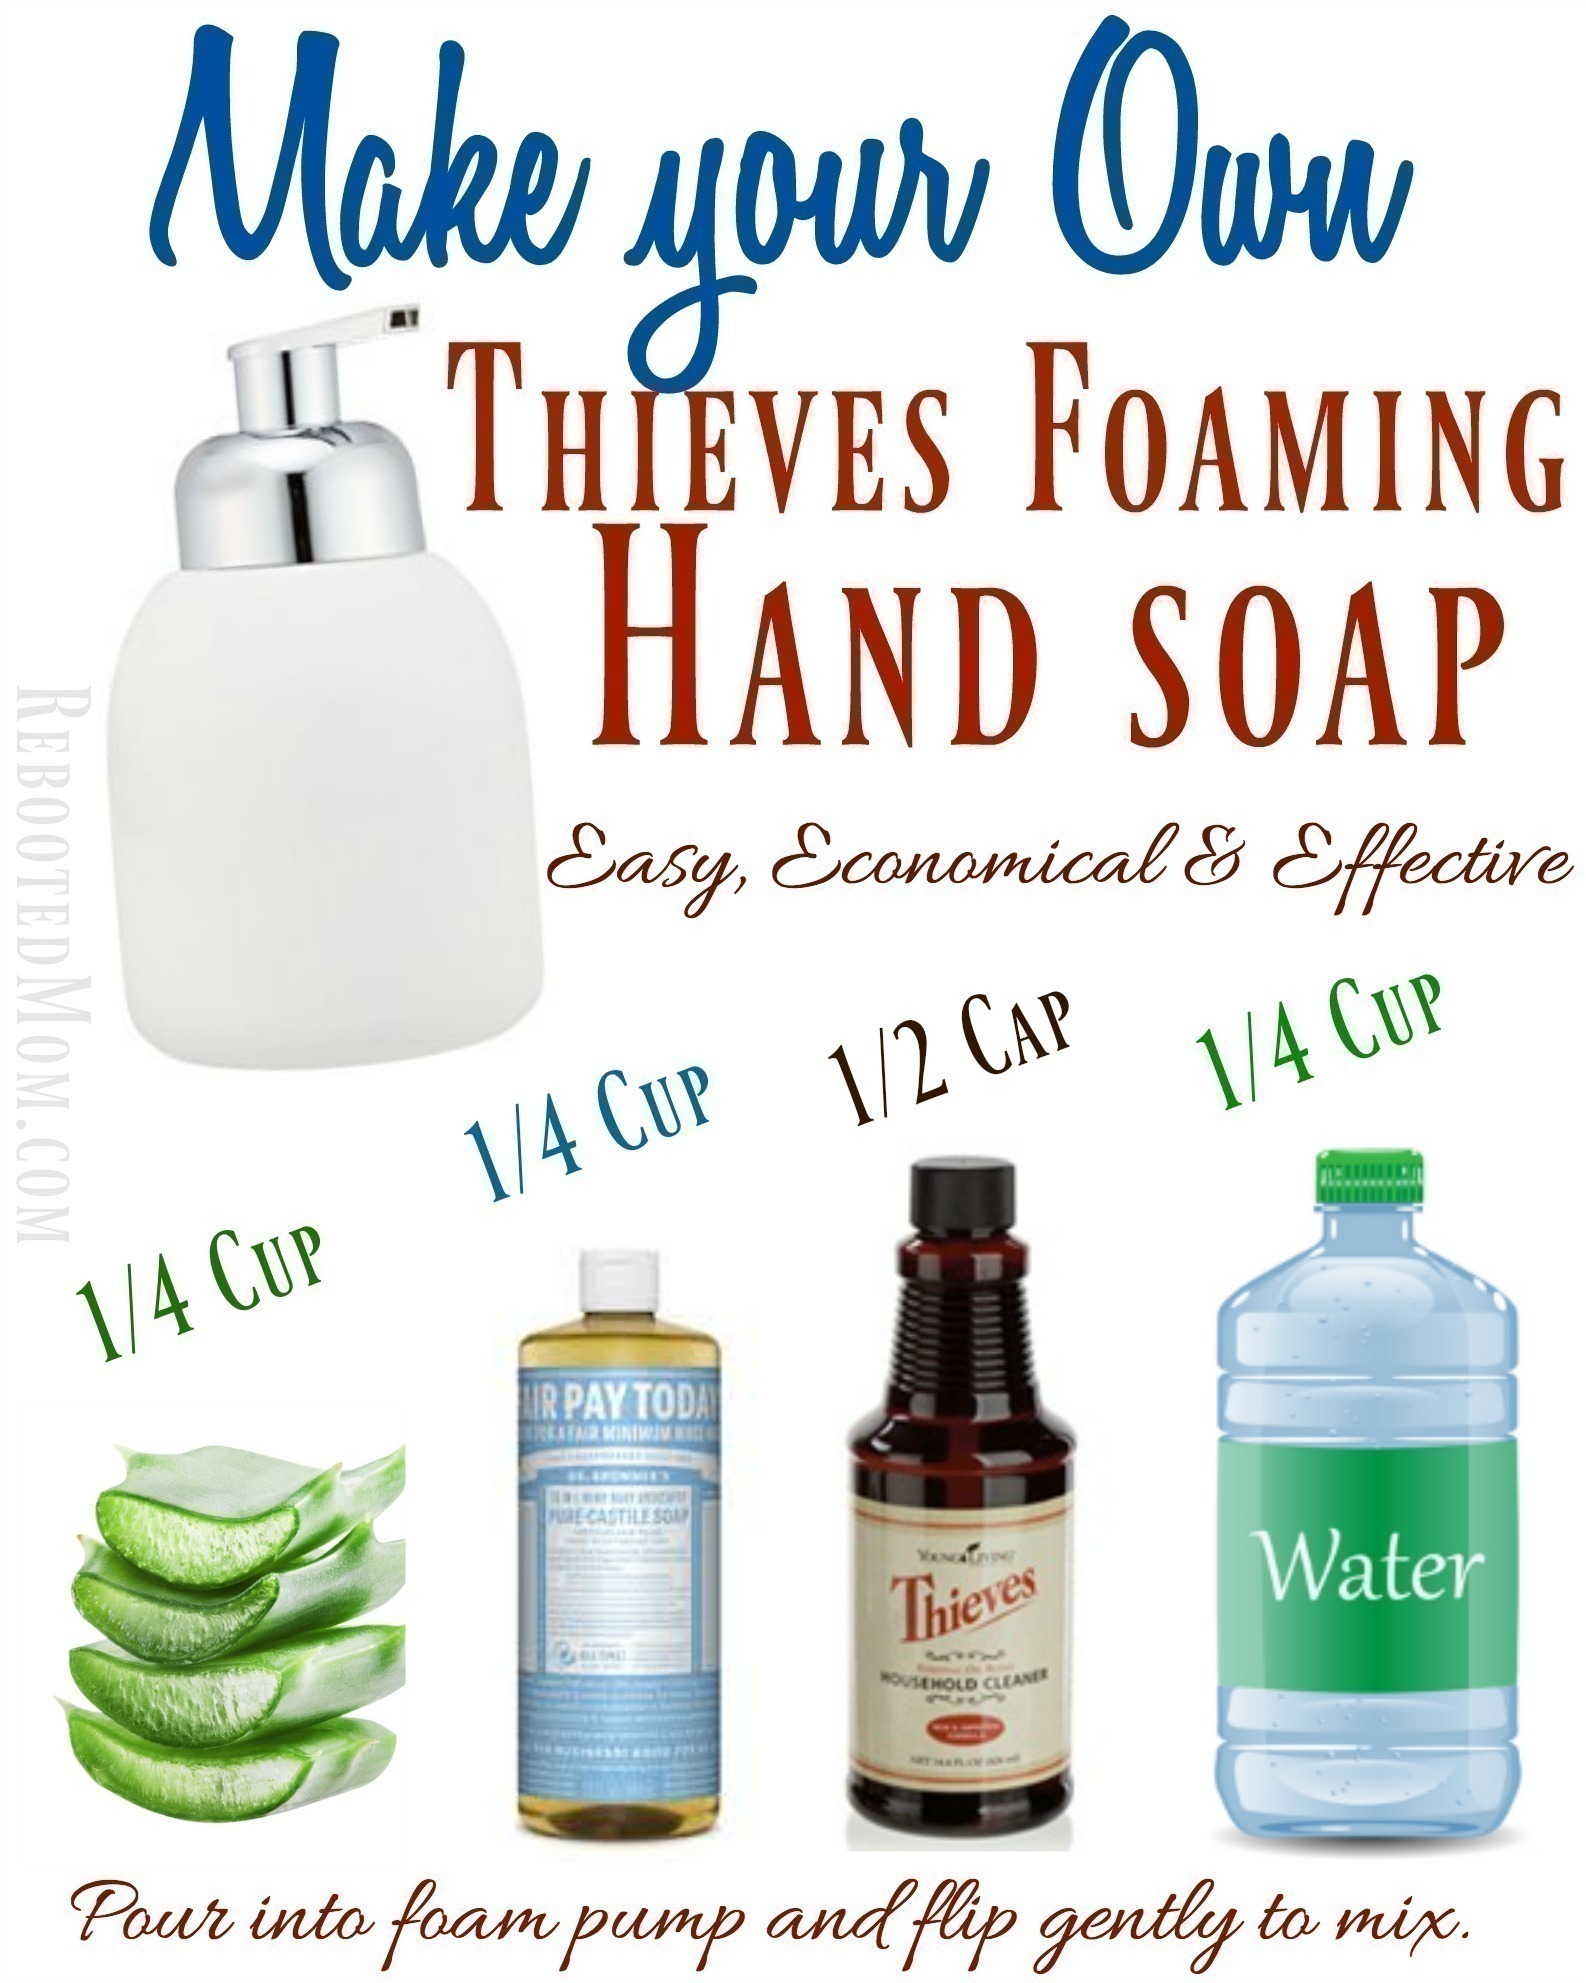 Make your Own Thieves Foaming Hand Soap